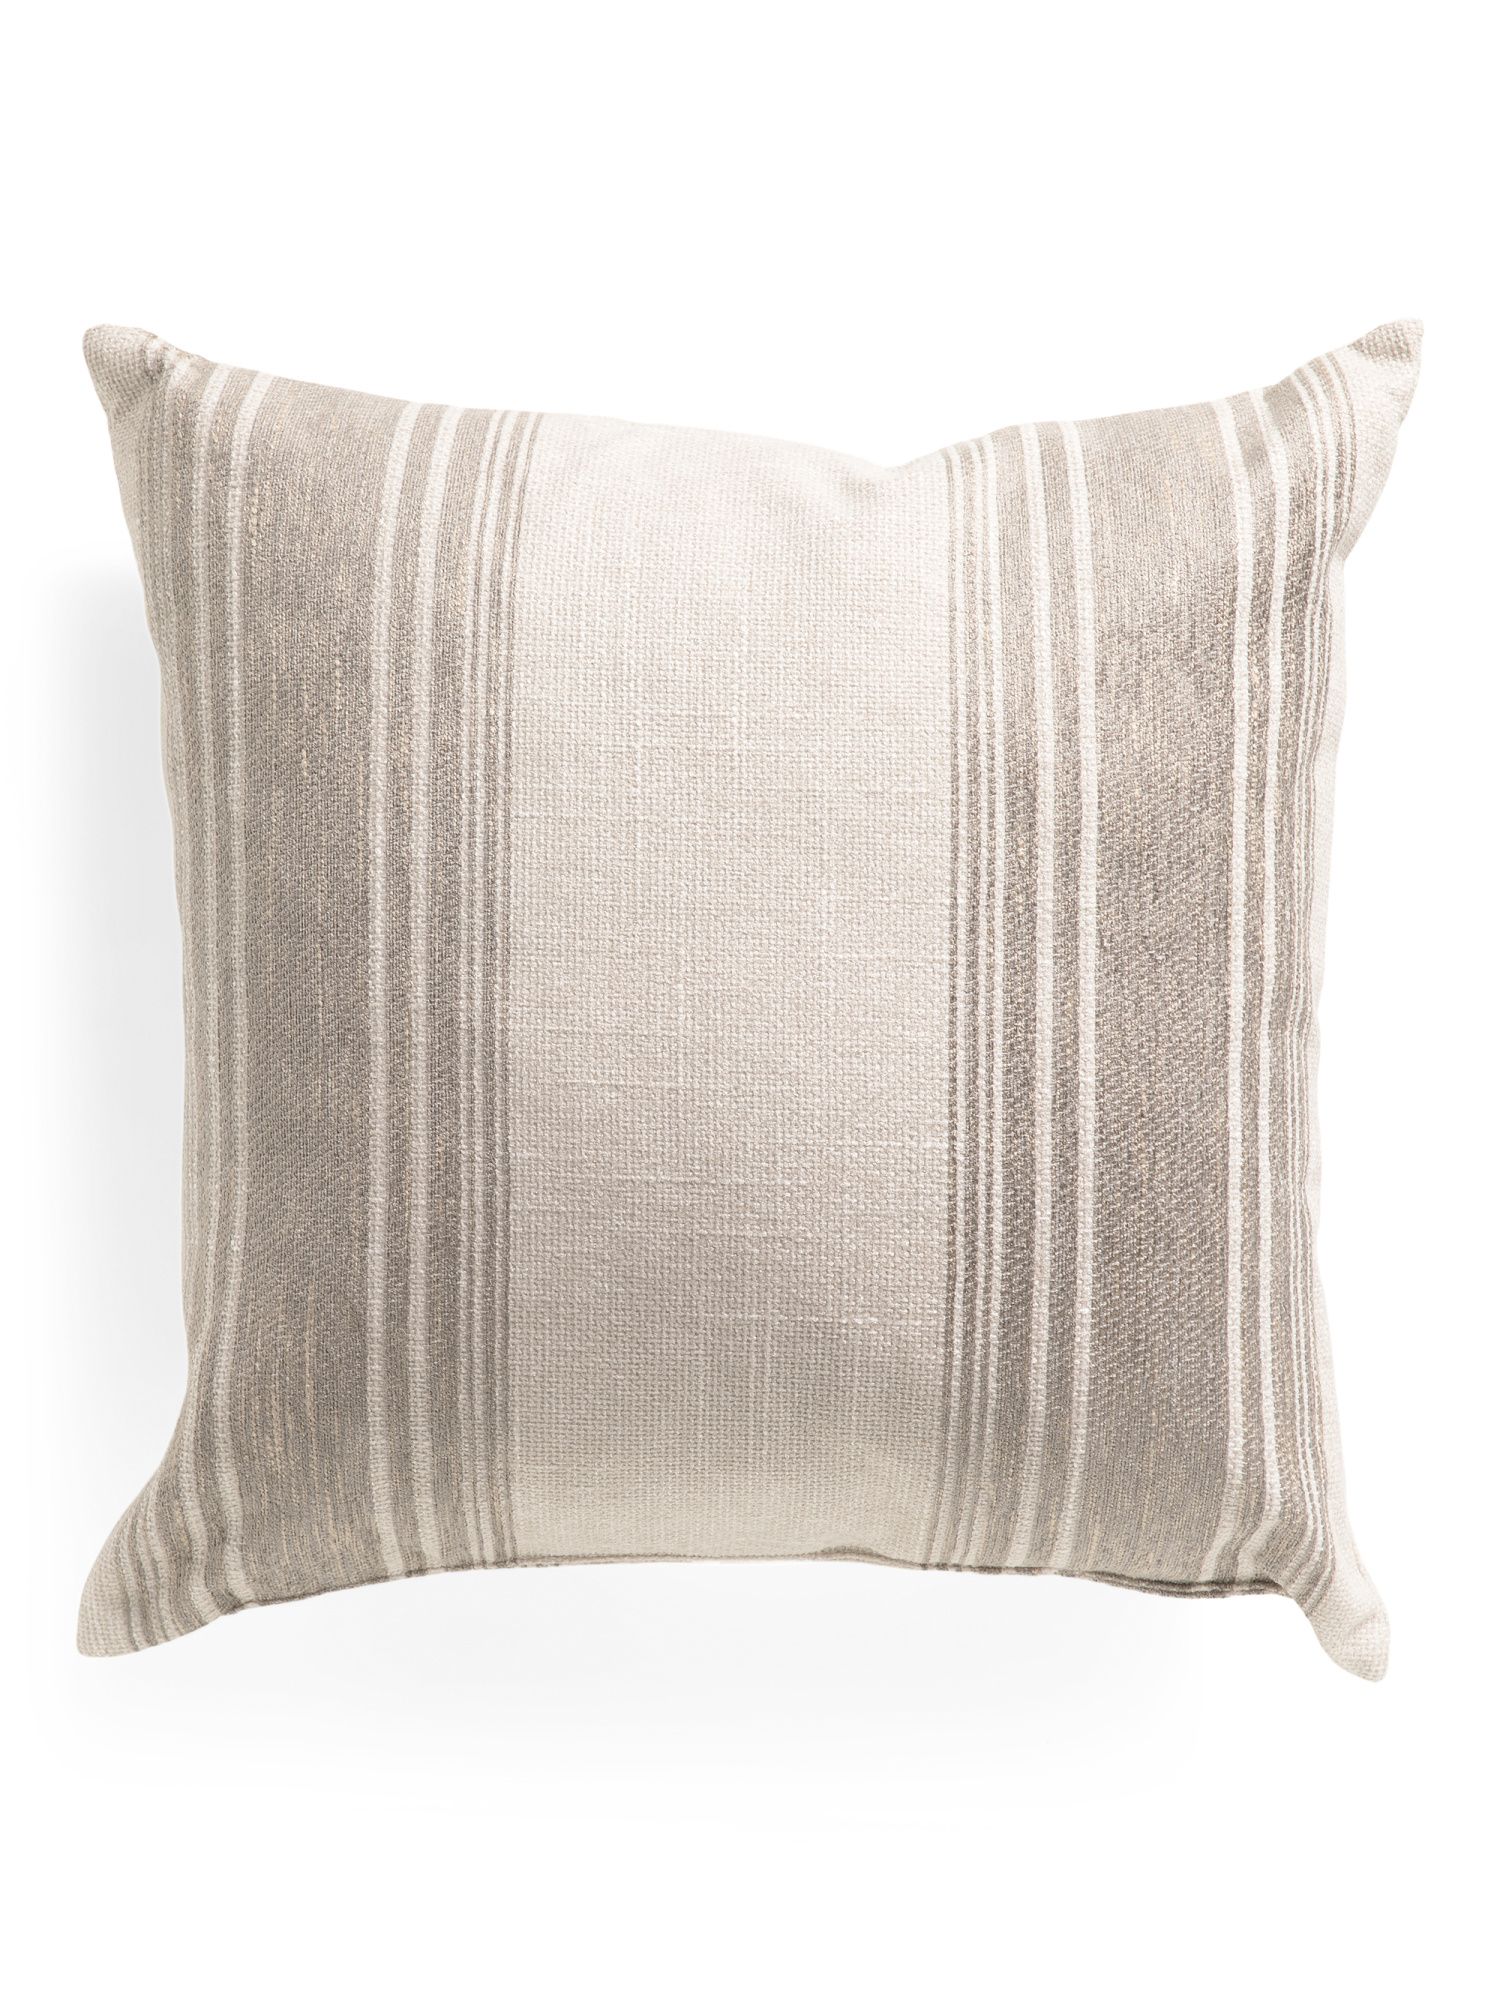 Made In Usa 24x24 Striped Pillow | Marshalls